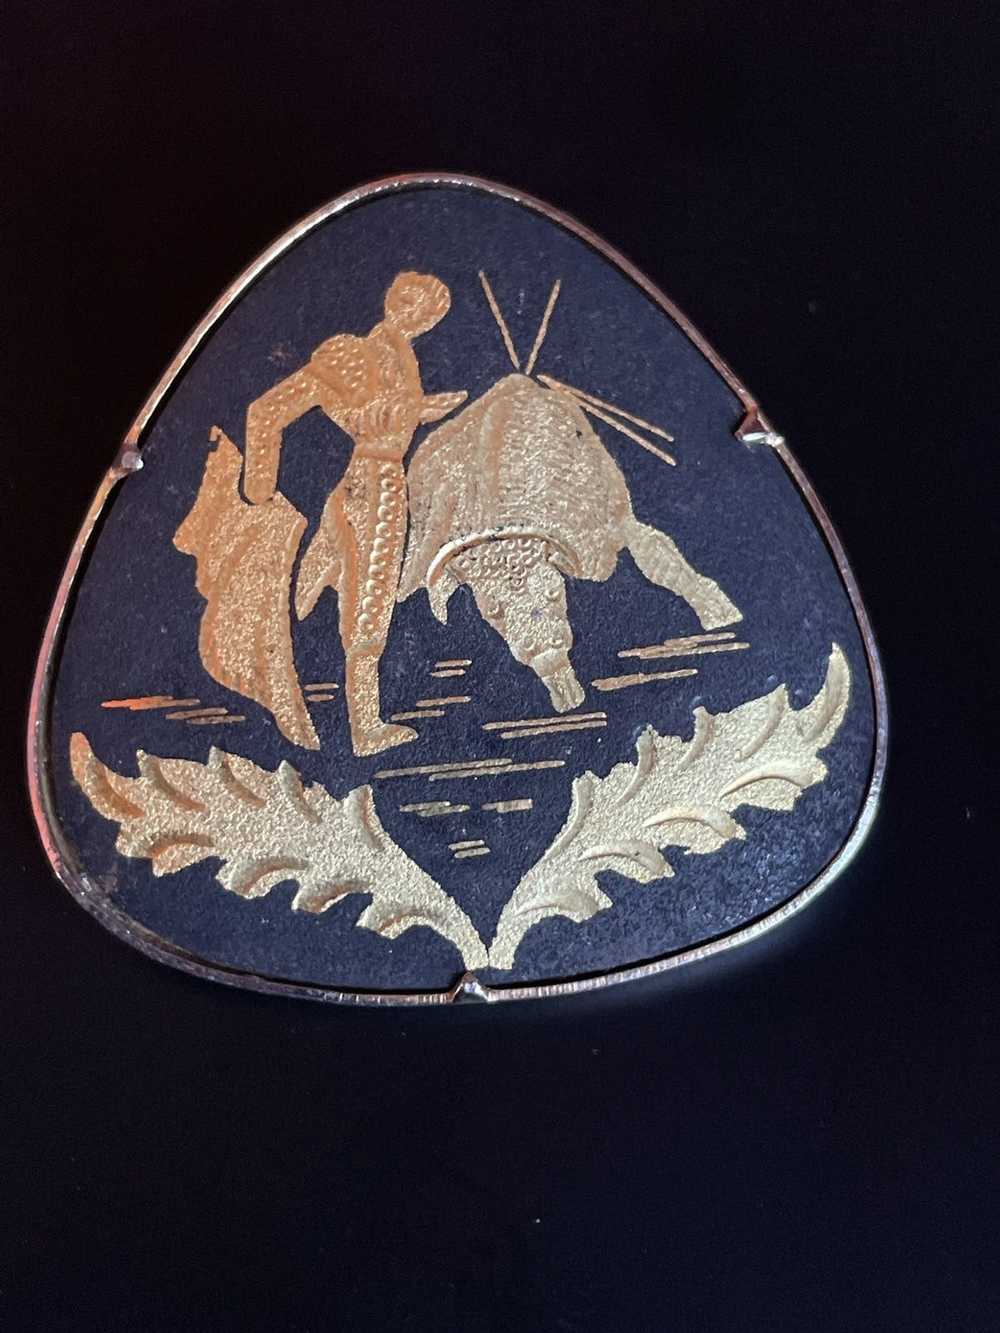 Vintage Bull fighter pin - image 1